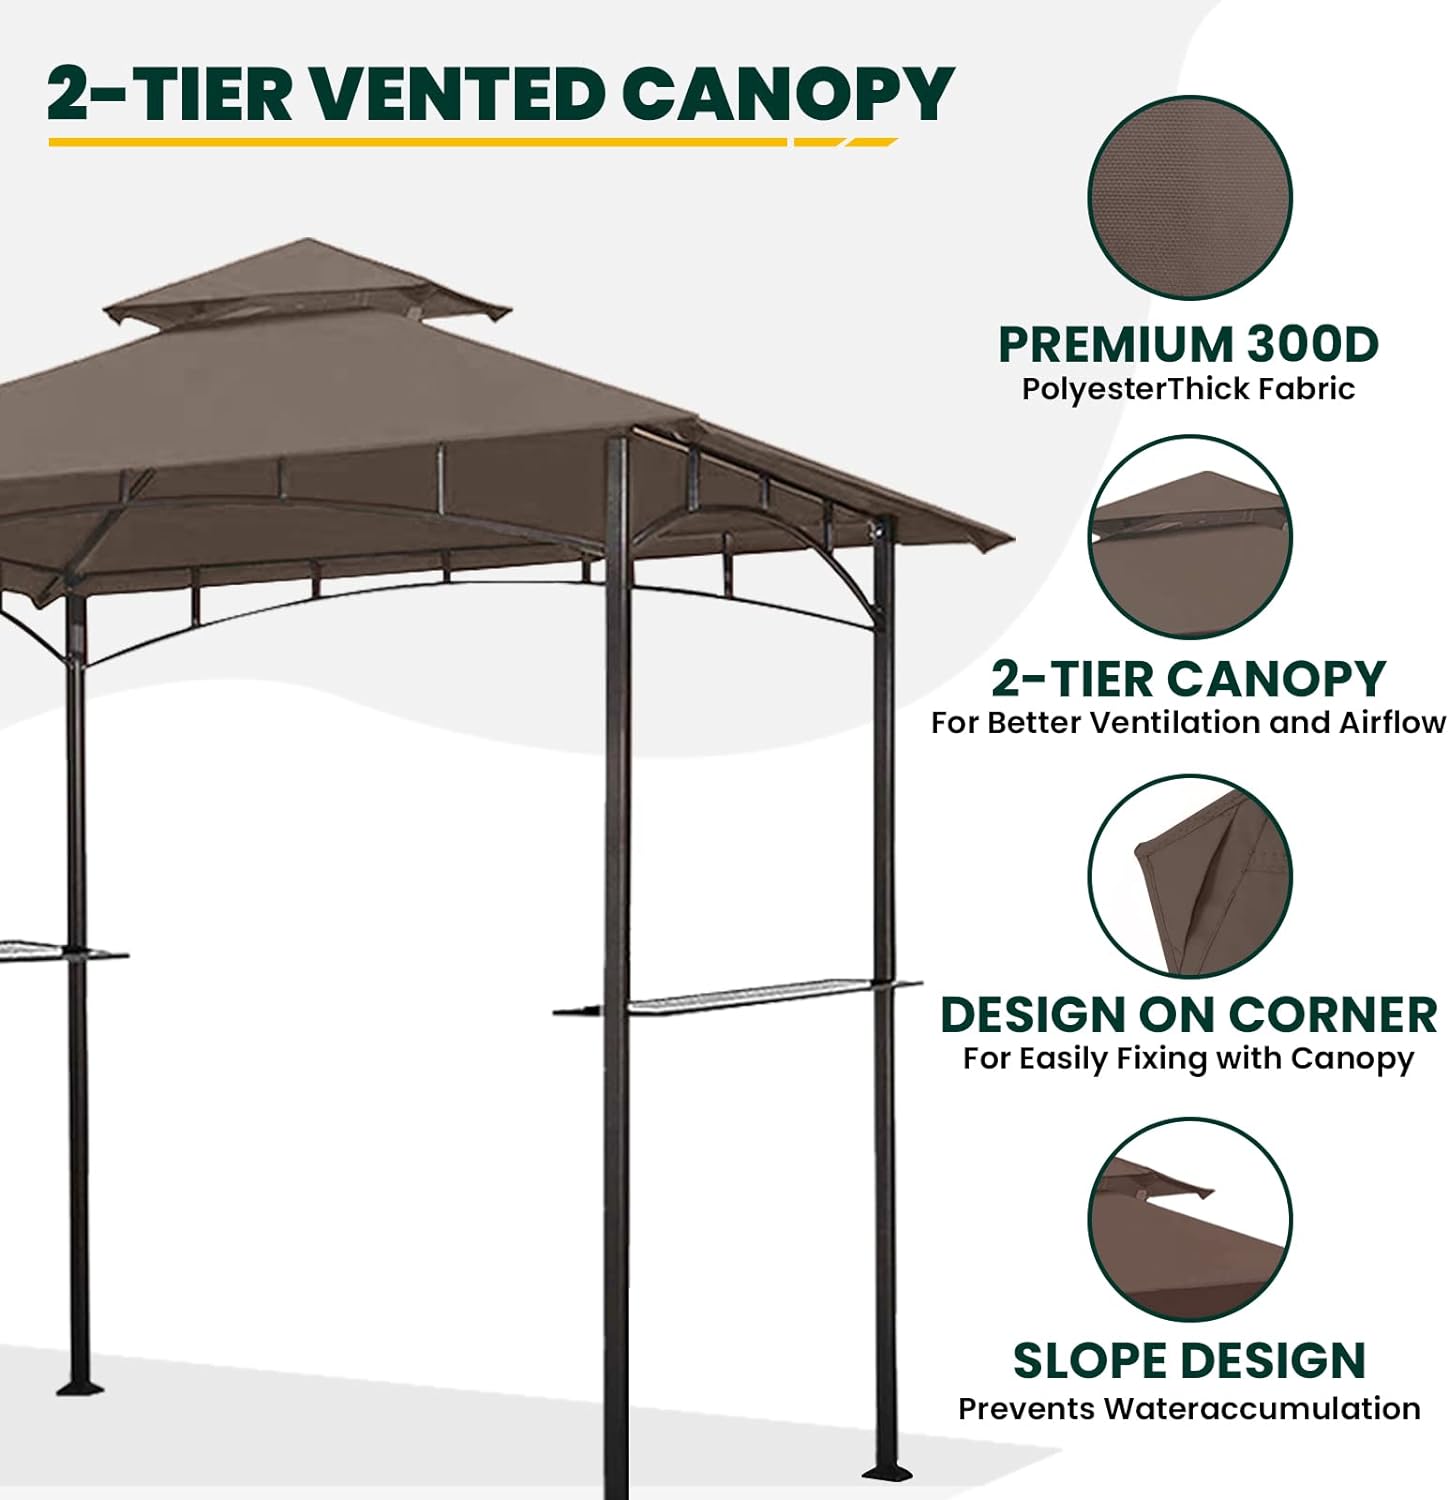 Grill Gazebo Replacement Canopy Roof, 5' x 8' Outdoor BBQ Gazebo Canopy Top Cover, Double Tired Grill Shelter Cover with Durable Polyester Fabric